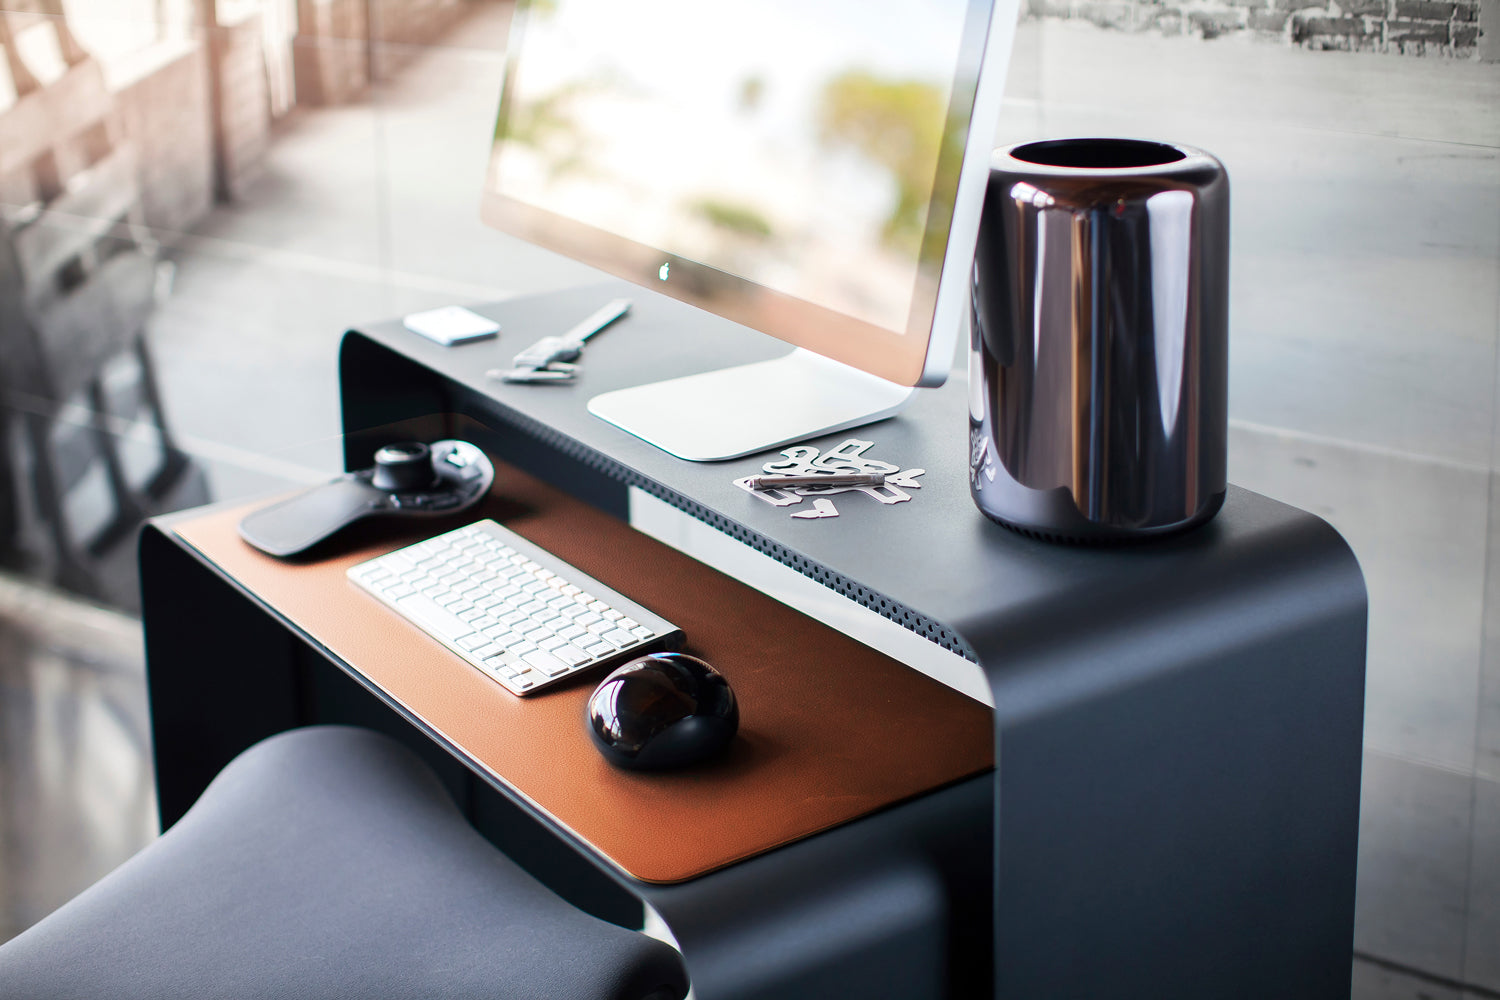 onelessdesk tenth anniversary edition with leather desk pad